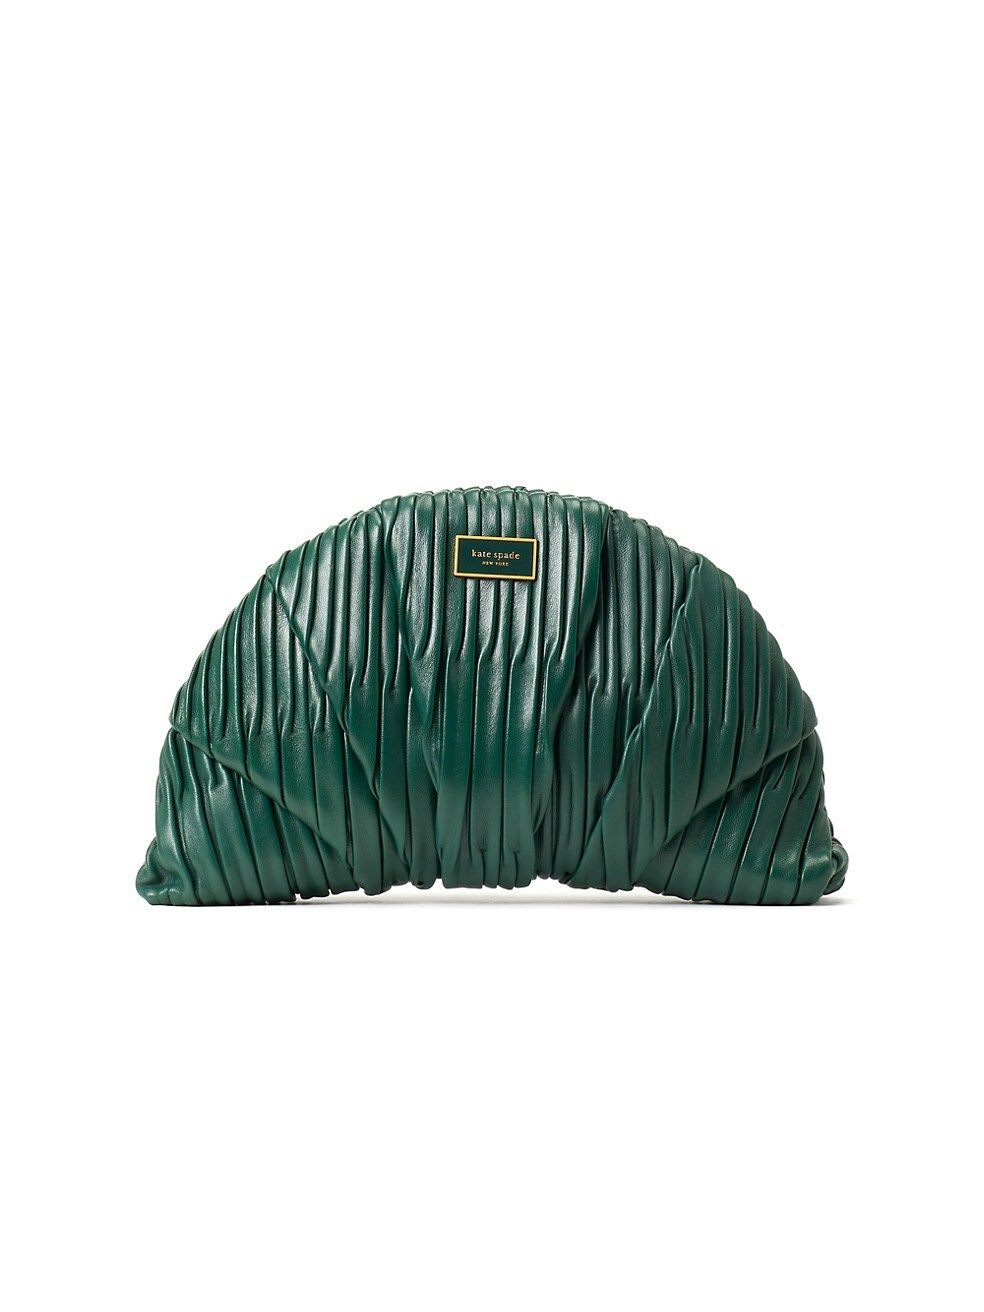 Patisserie Pleated Leather Clutch-On-Chain | Saks Fifth Avenue